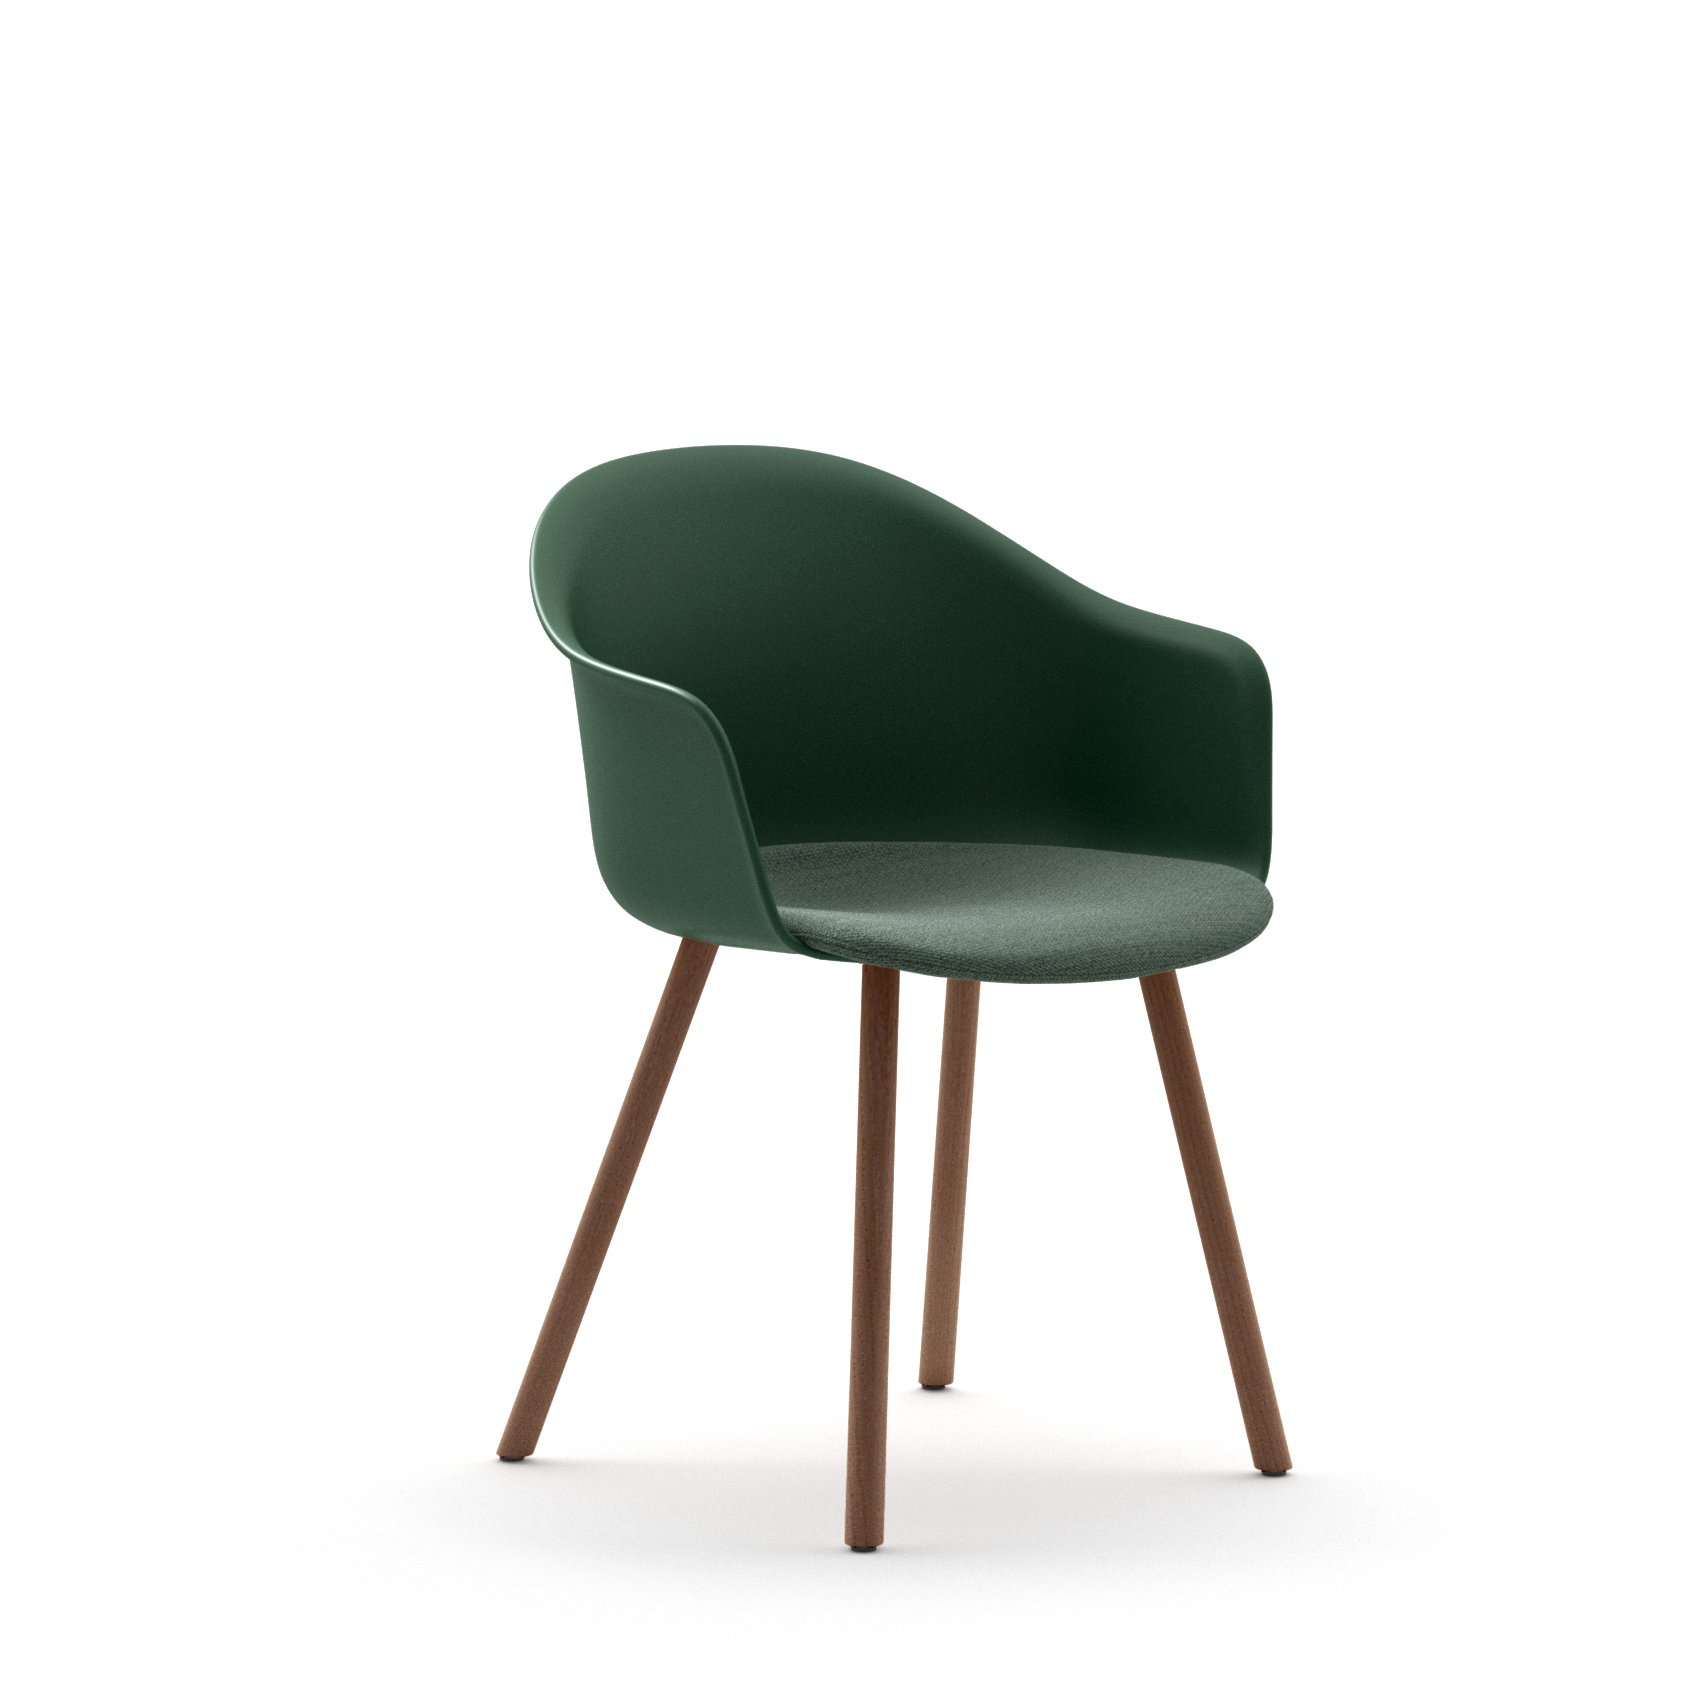 Mani Armshell 4WL Armchair from Arrmet, designed by Welling/Ludvik